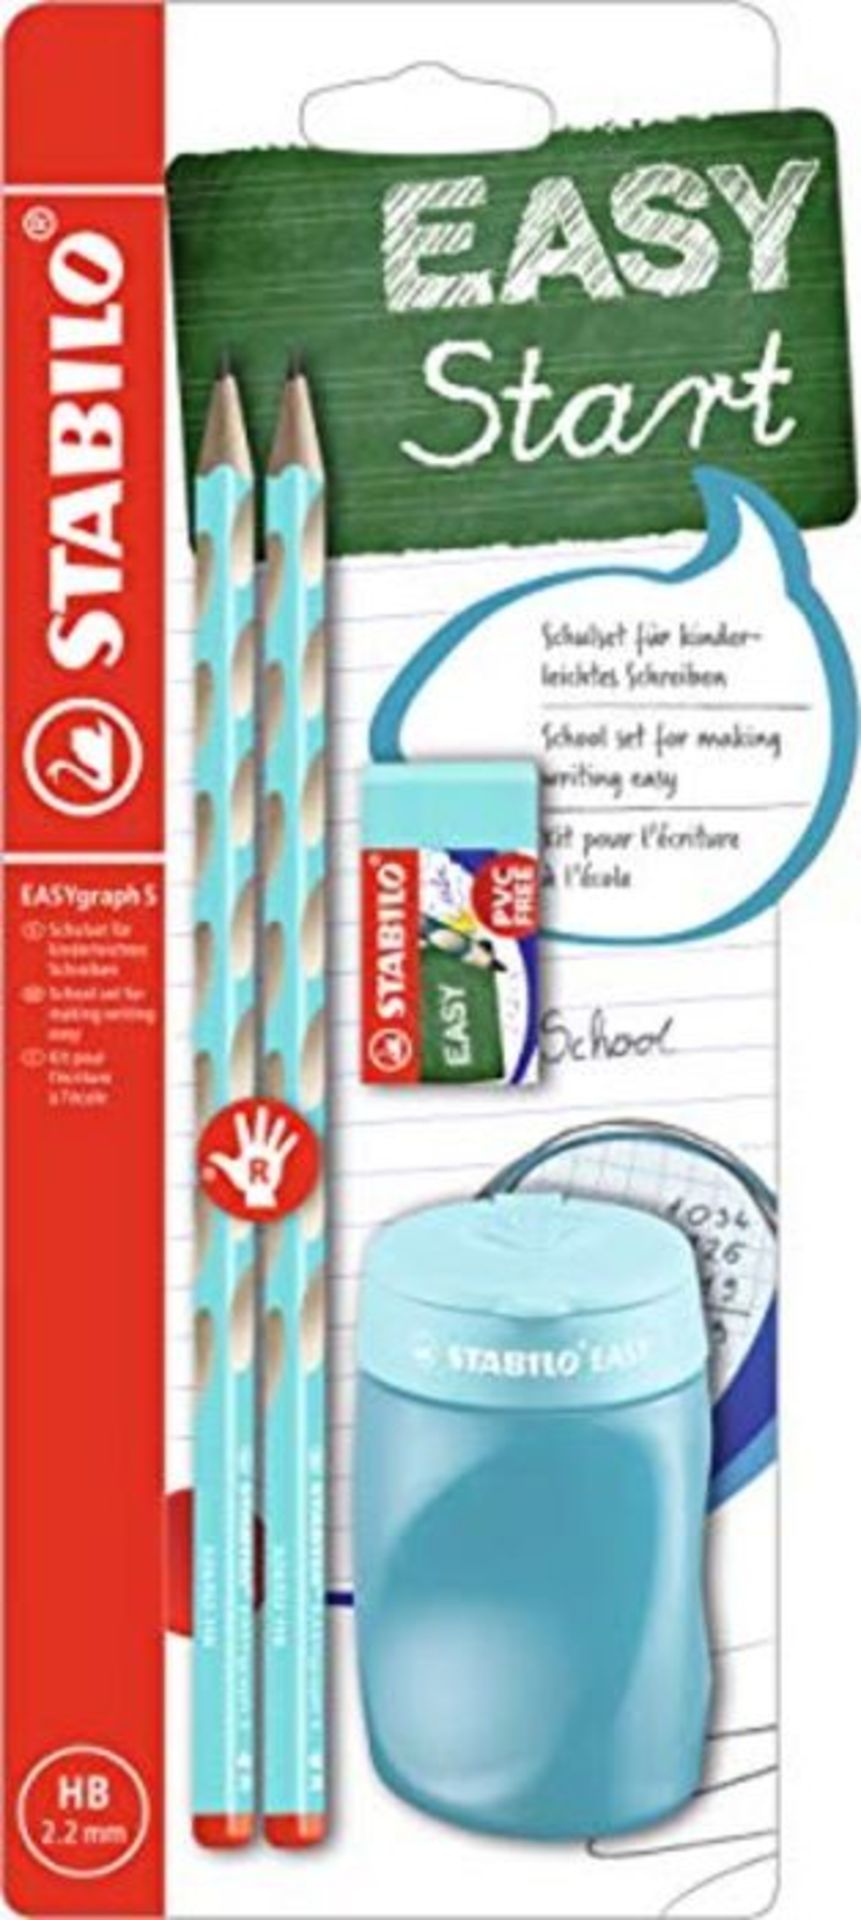 [INCOMPLETE] EASYgraph S School Set Right Handed Blue - STABILO EASYgraph S Pencil x 2